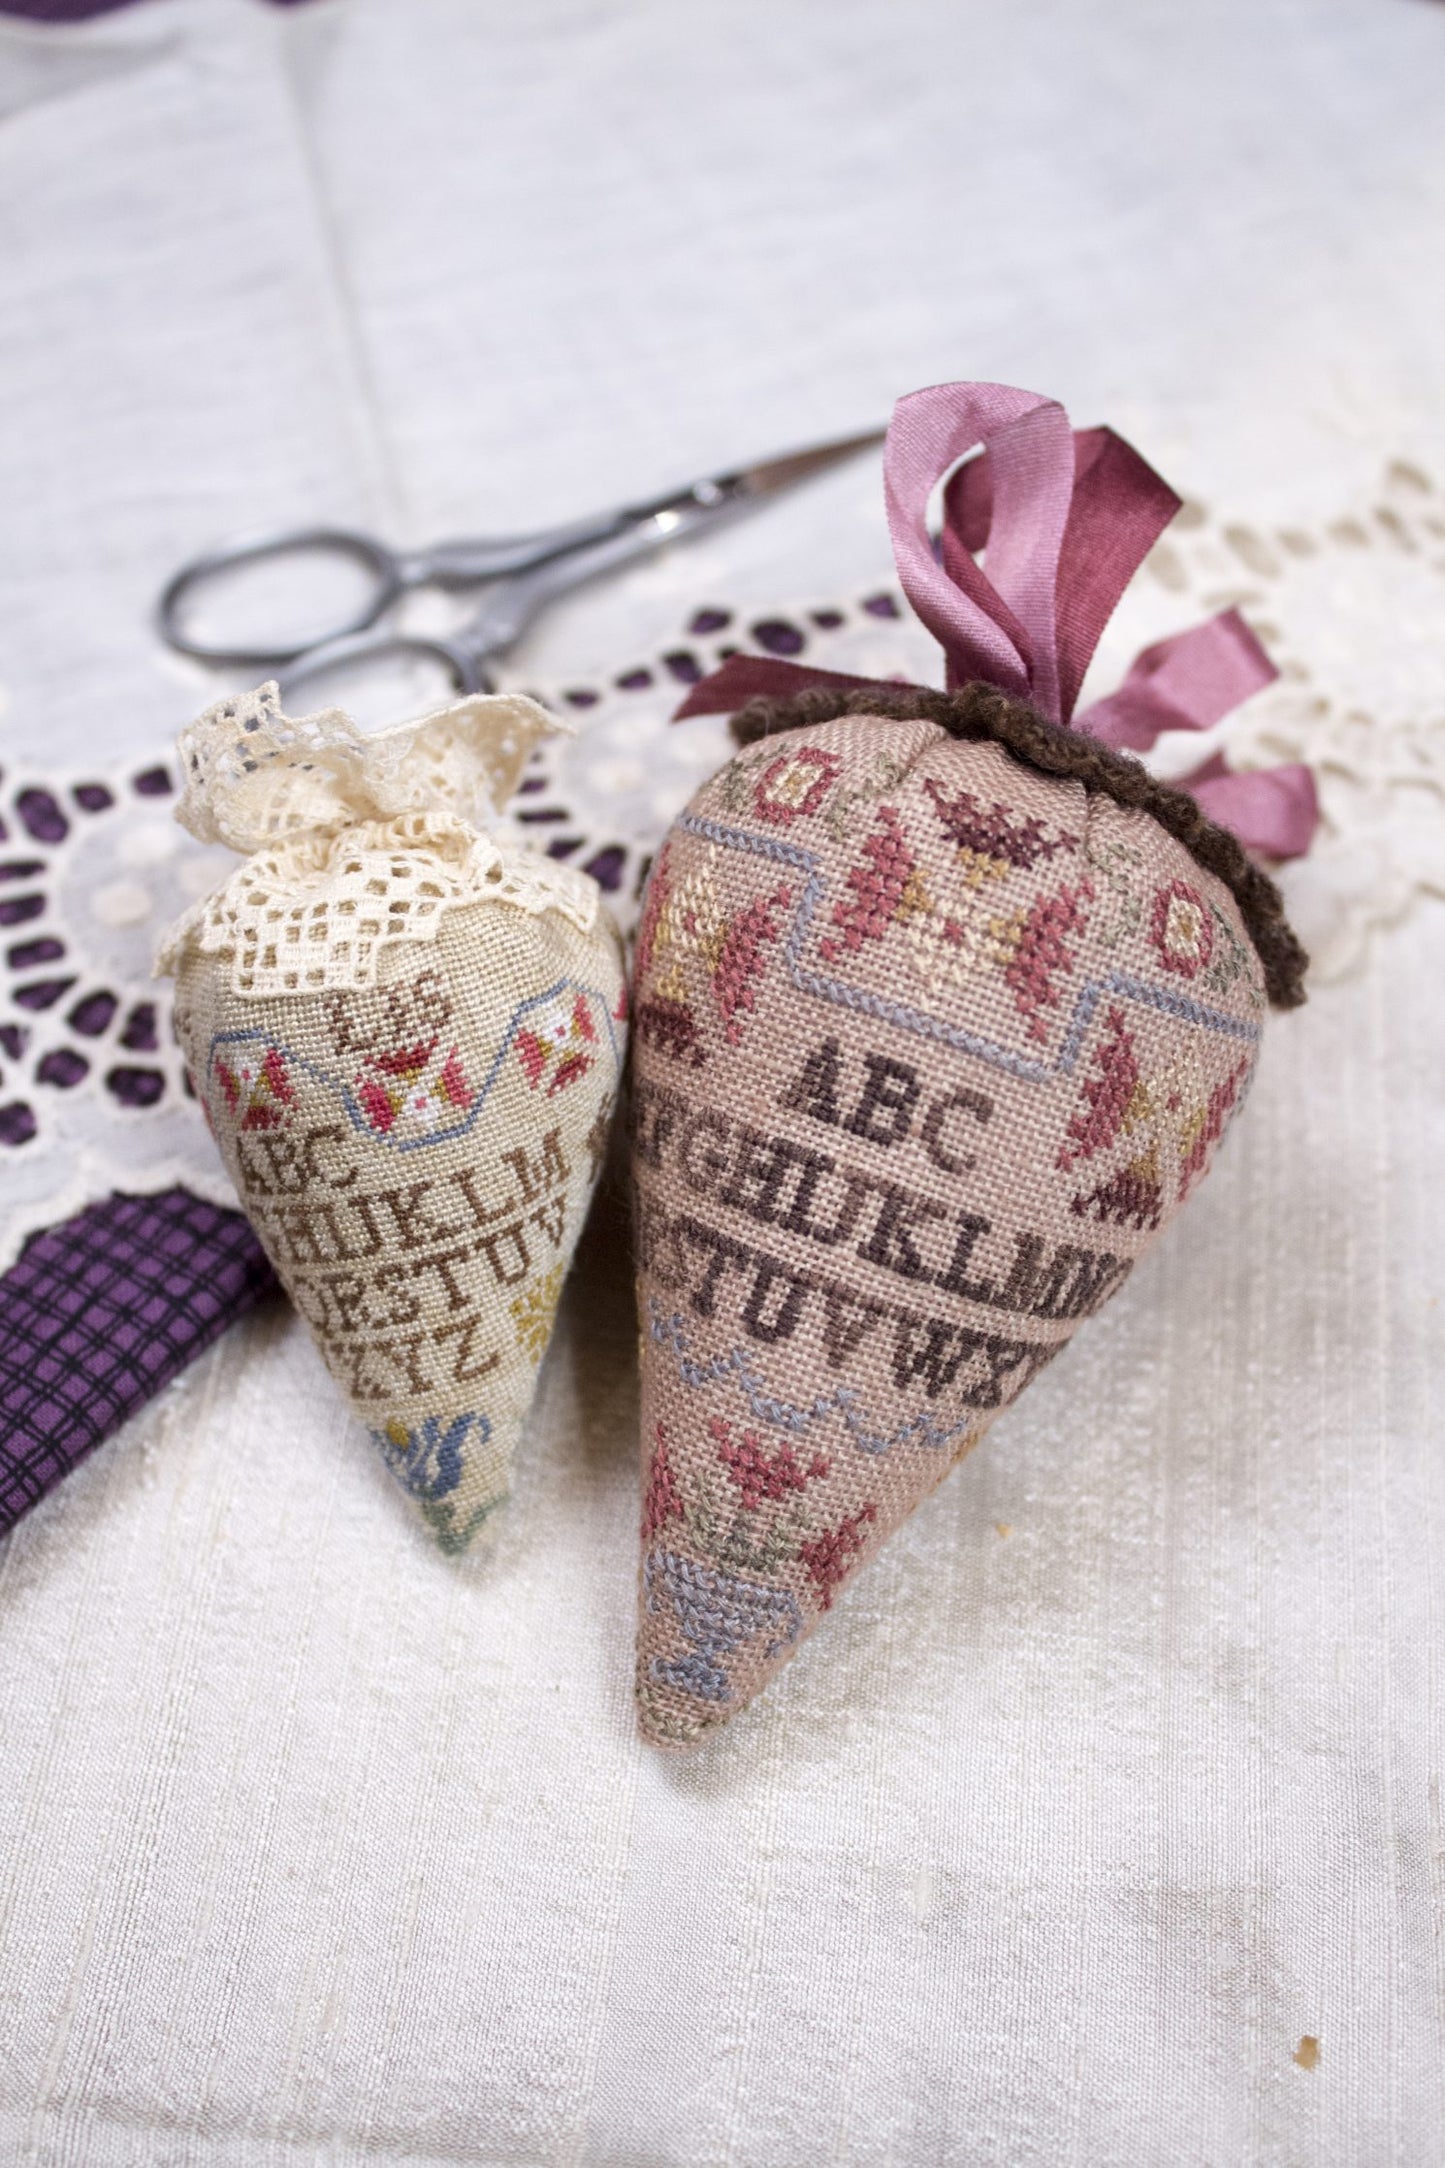 SAMPLER BERRY in Silk Cross Stitch Embroidery Pincushion Kit from Erica Michaels: Pattern, Silk, Floss, Lace and JABC Pins